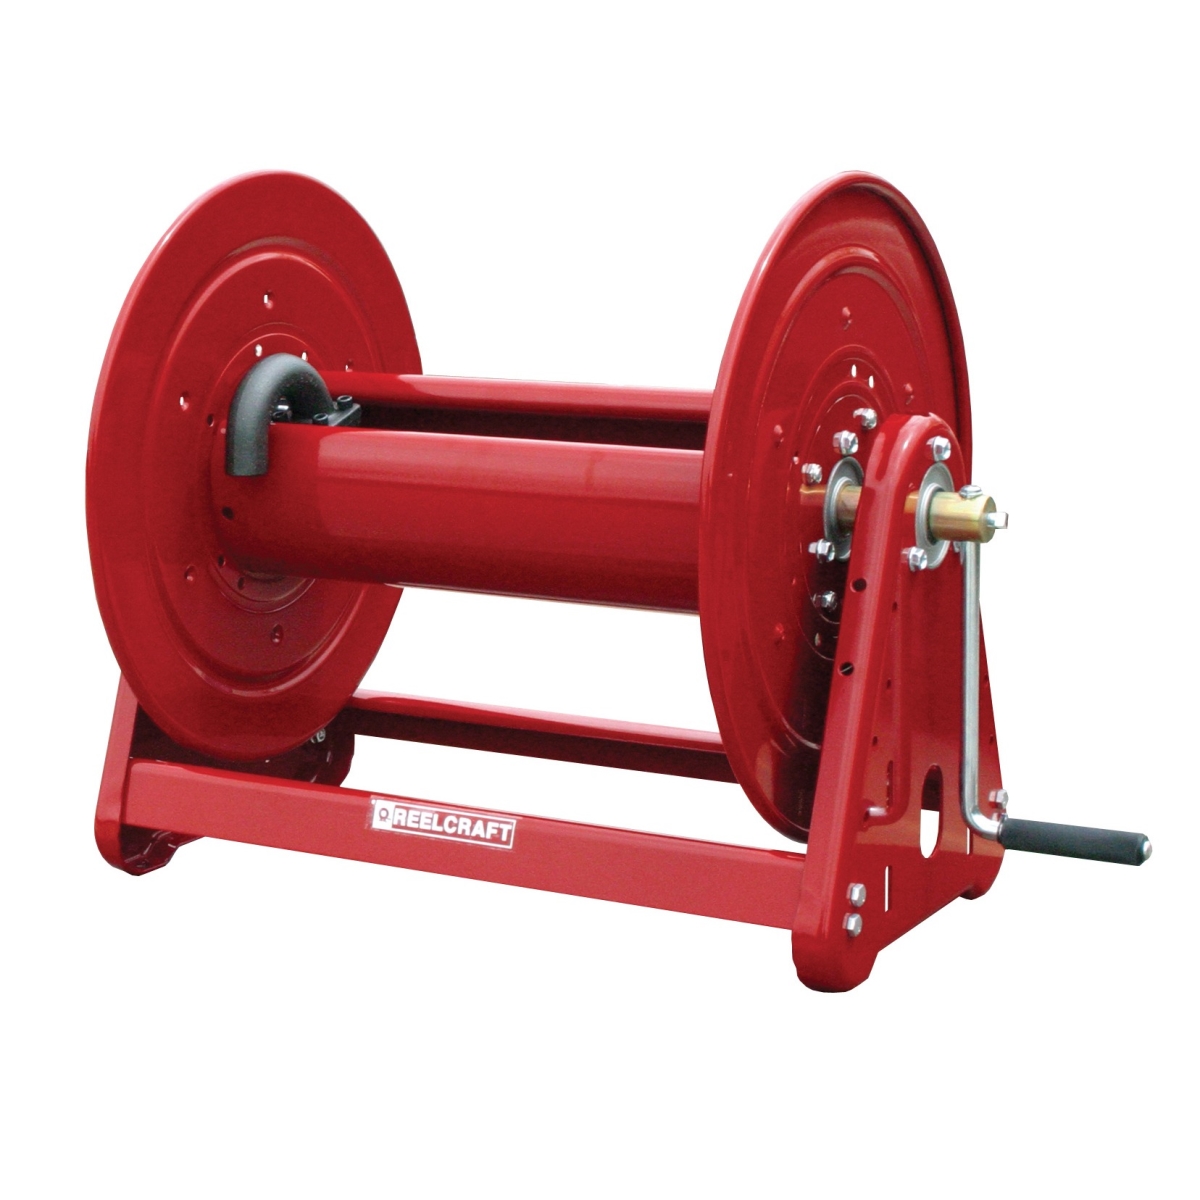 Ca32122 L 0.5 In. X 400 Ft. Heavy Duty 1000 Psi Hand Crank Without Hose Reel, Red